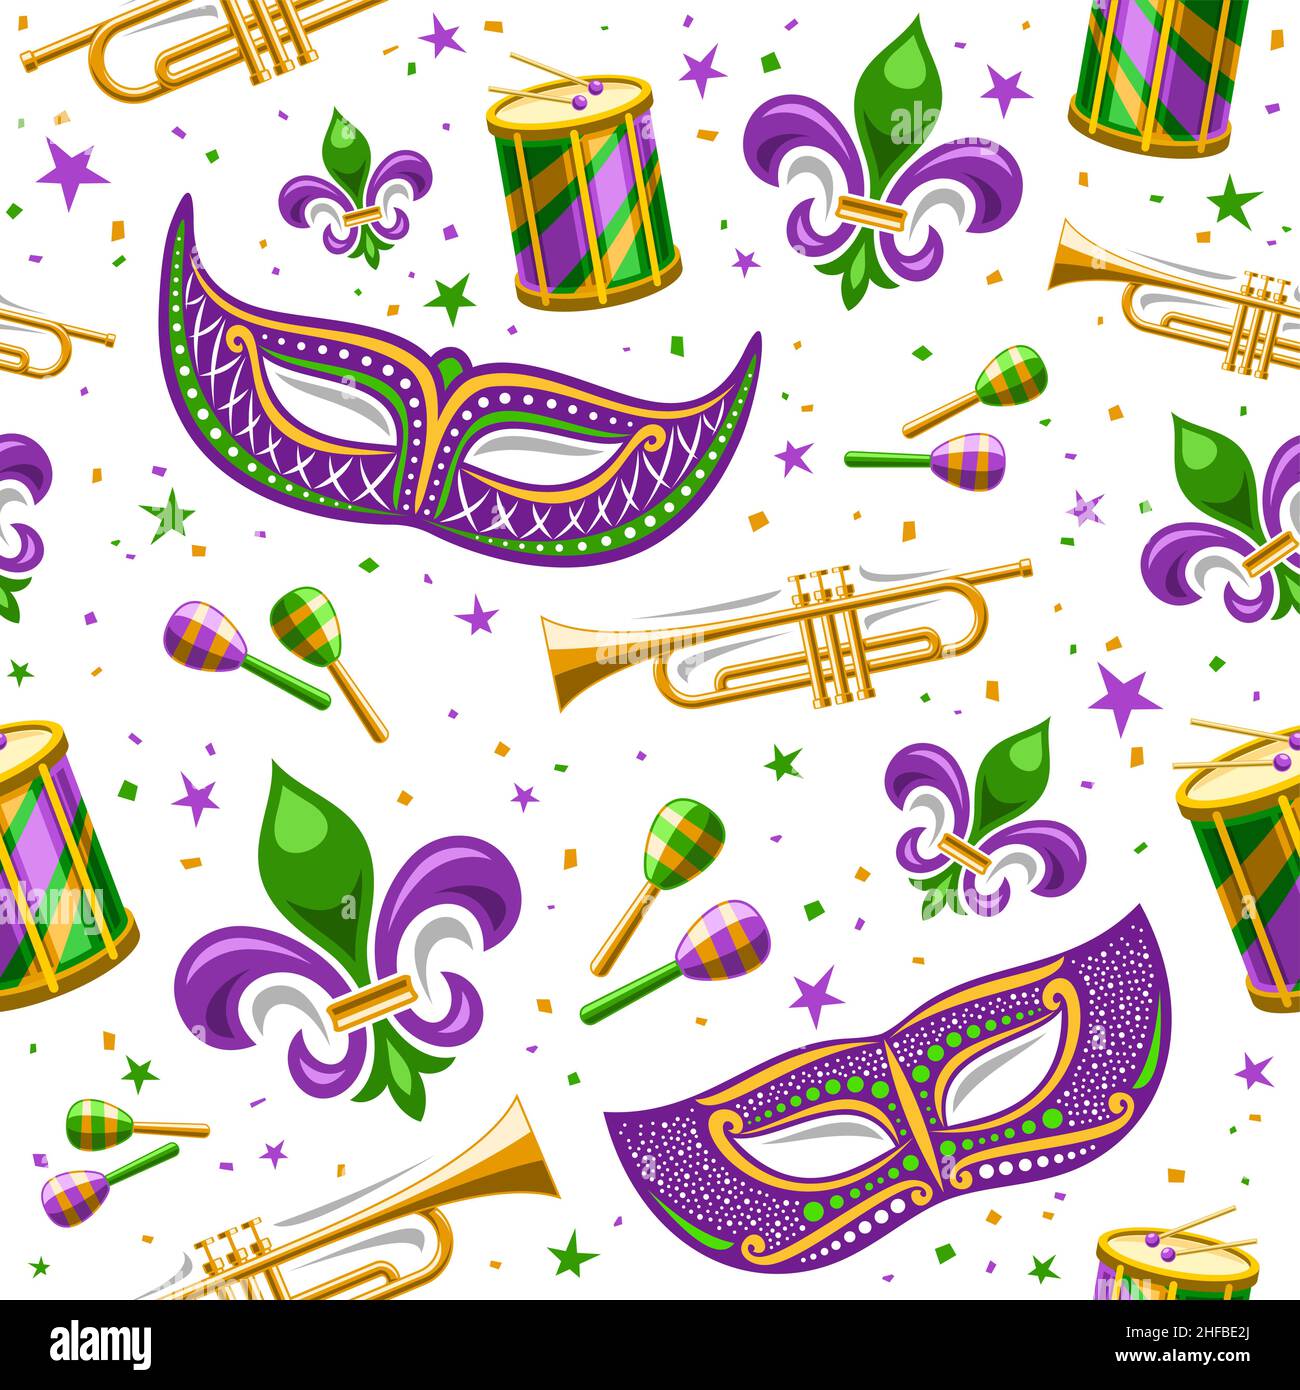 Vector Mardi Gras Seamless Pattern, square repeating background with decorative stars, purple venetian mask, street musical instruments, cut out illus Stock Vector